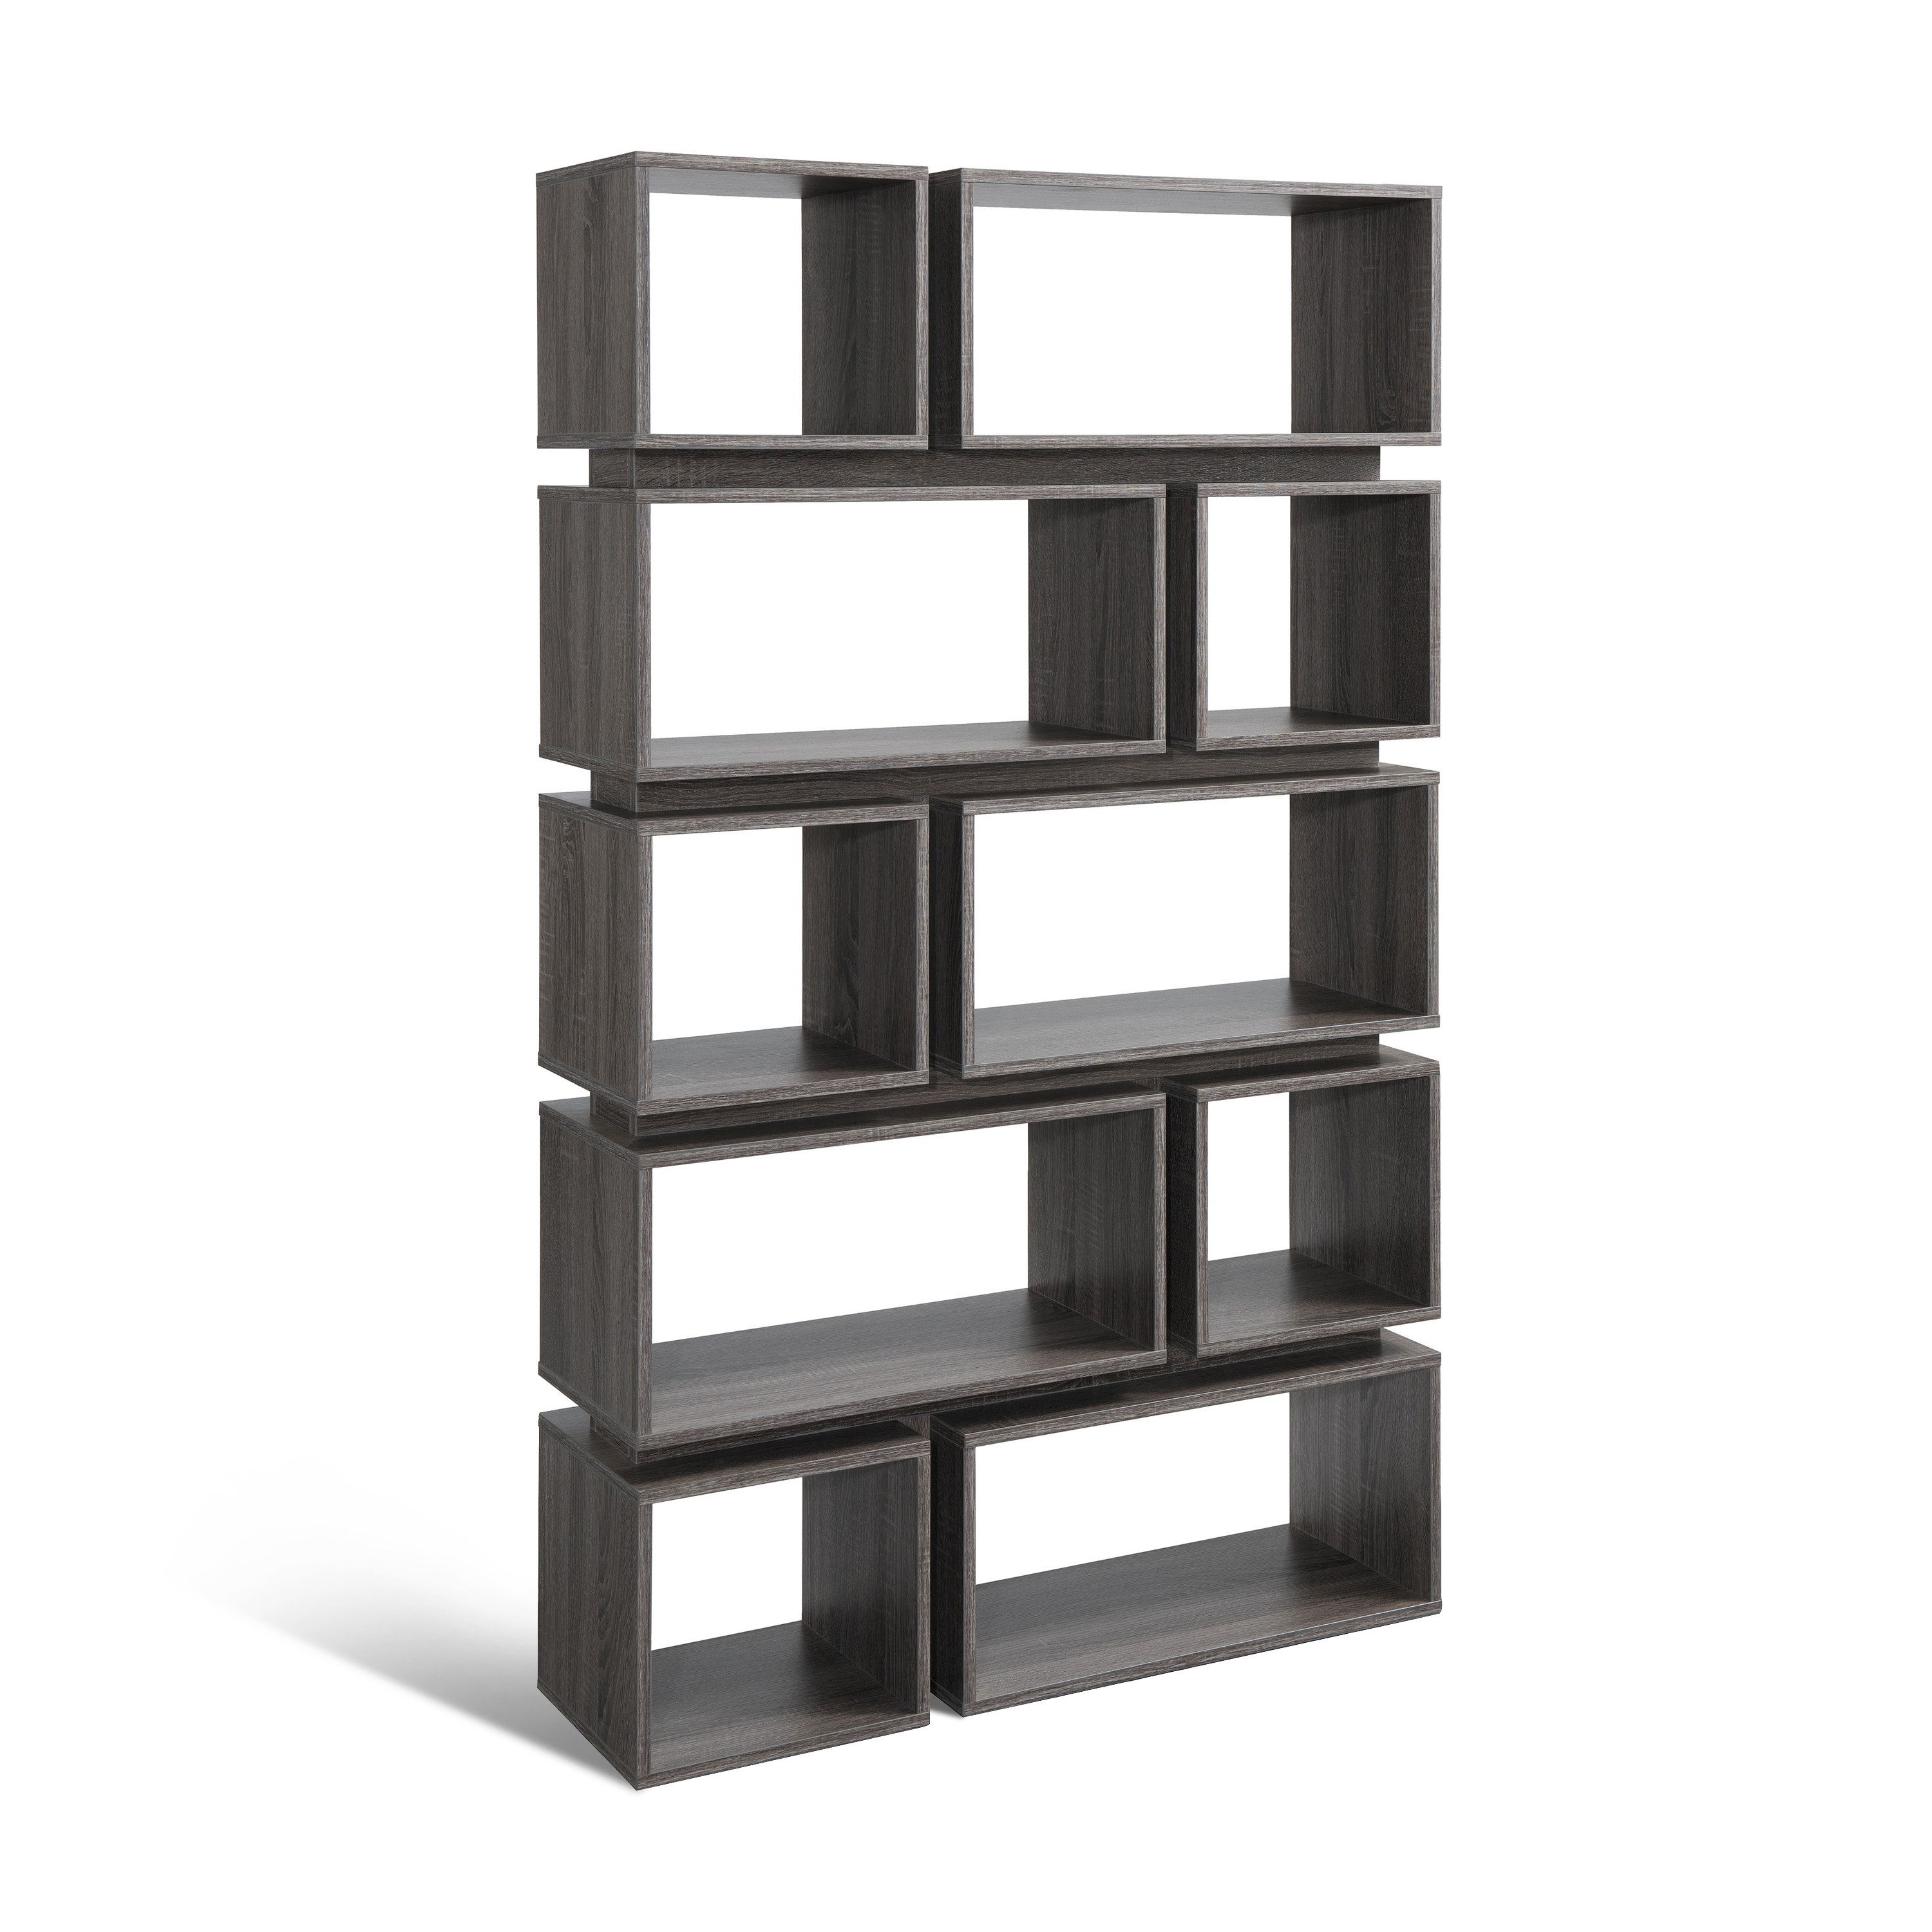 Allmodern With Regard To Favorite Ervin Geometric Bookcases (View 8 of 20)